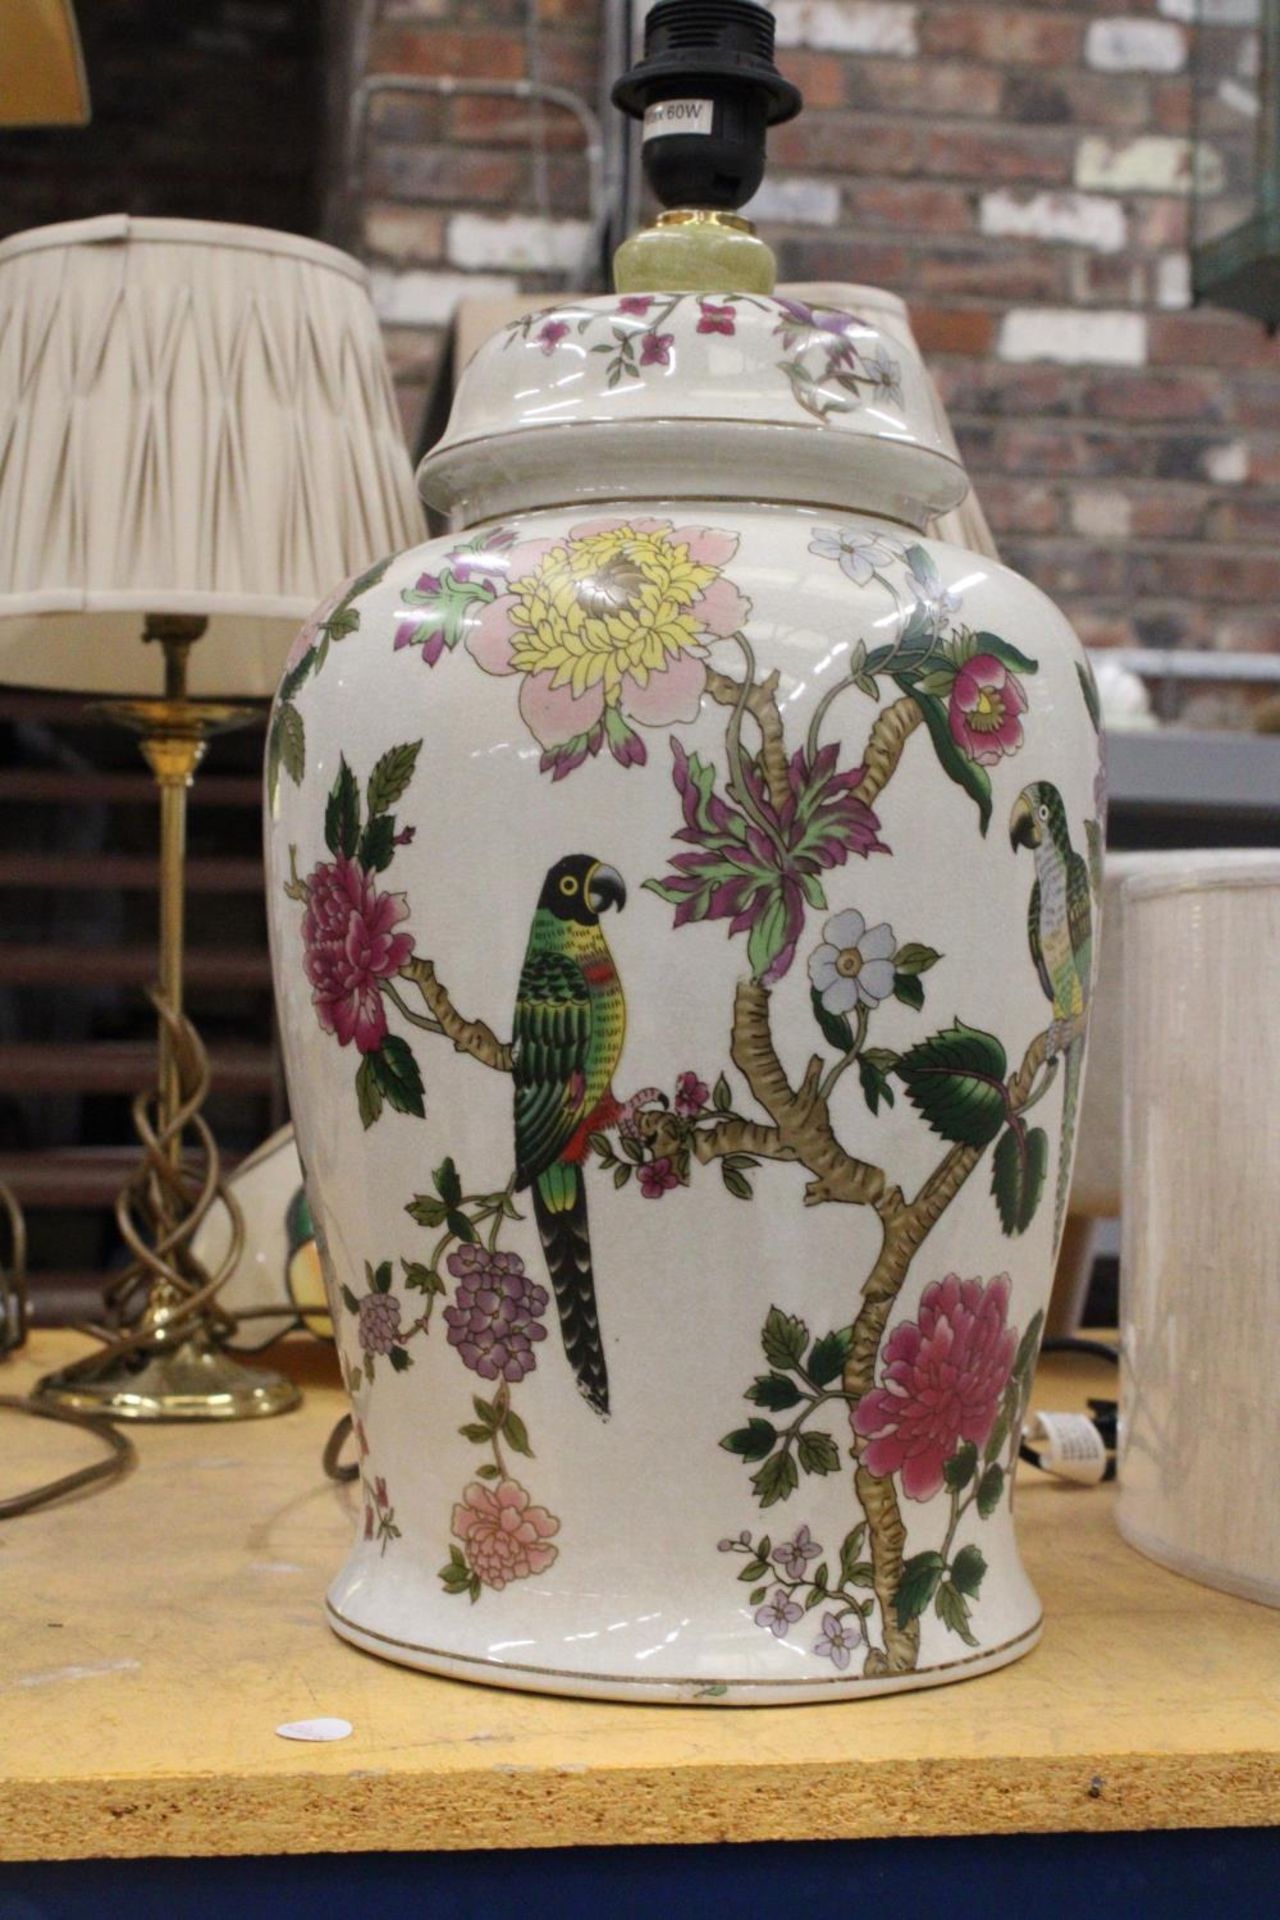 A LARGE CERAMIC TABLE LAMP WITH BIRD AND FLORAL DESIGN, WITH SHADE, HEIGHT APPROX 38CM - Image 2 of 4